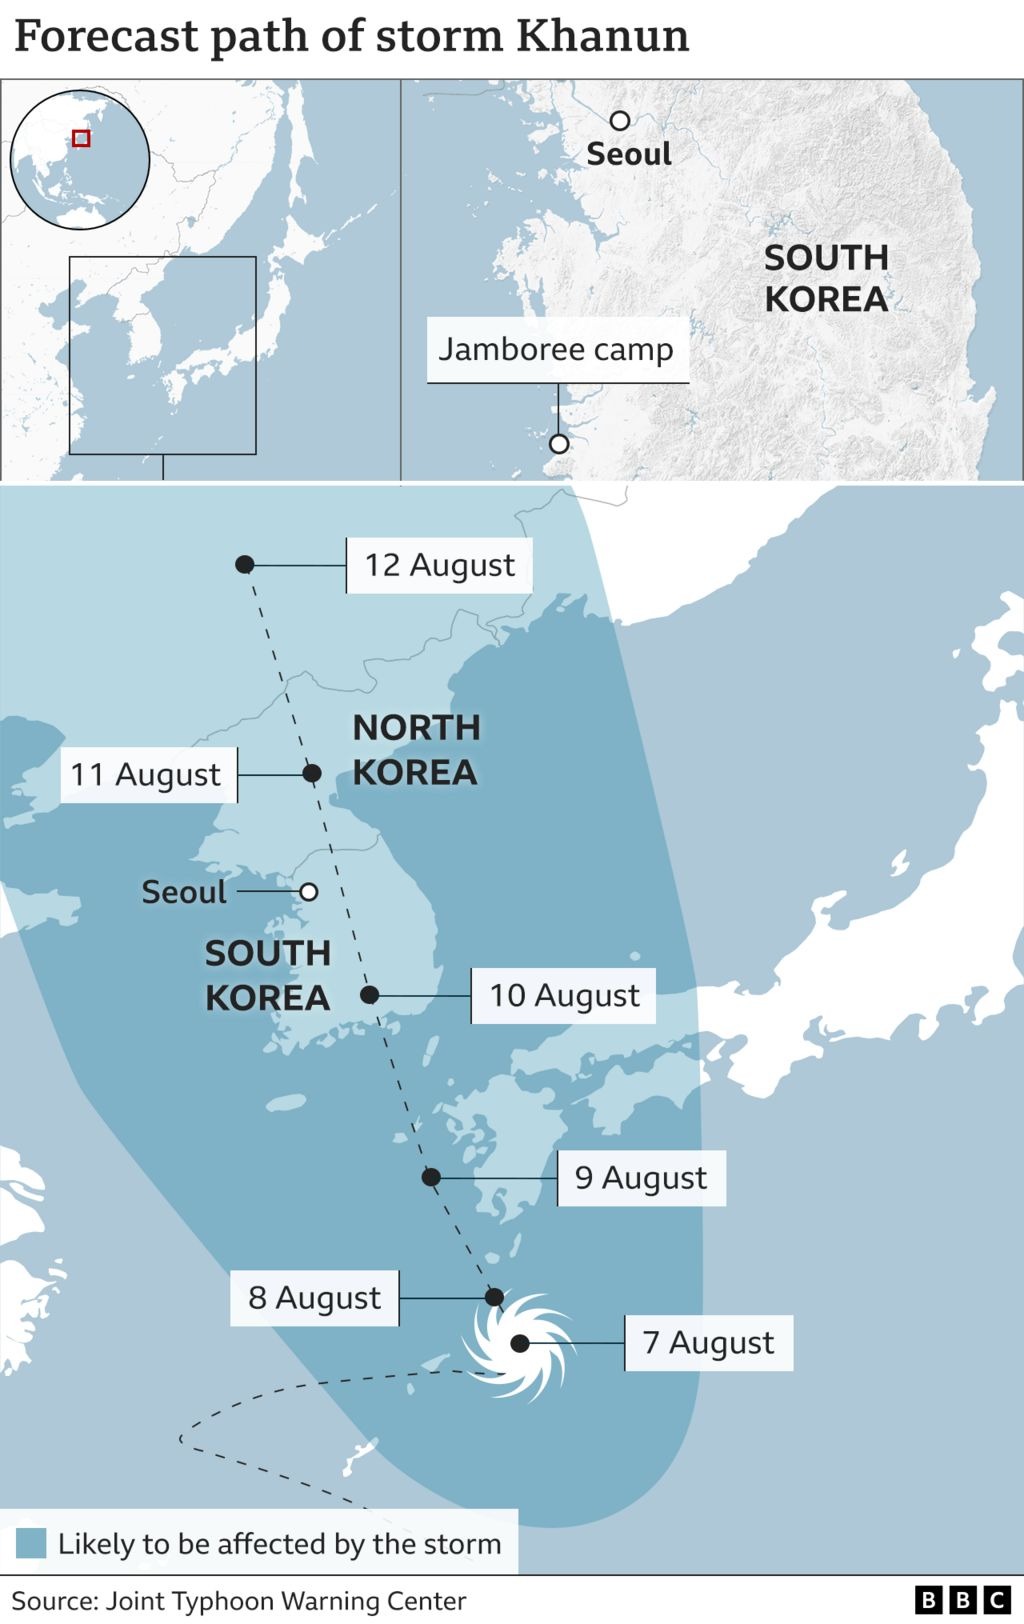 A map showing the path of a storm forecast to hit South Korea